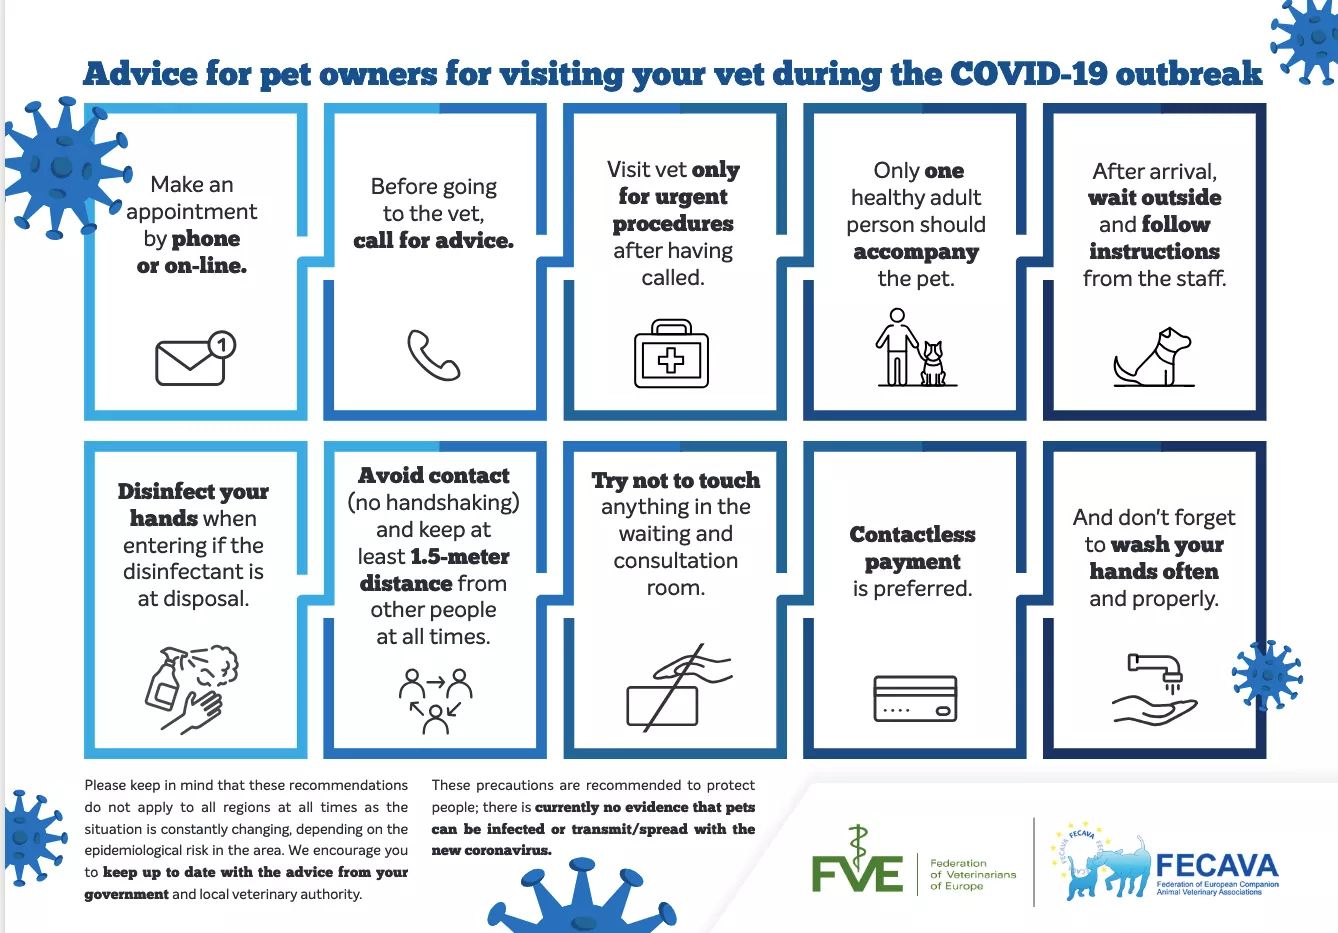 Advice for pet owners for visiting your vet during the COVID-19 outbreak